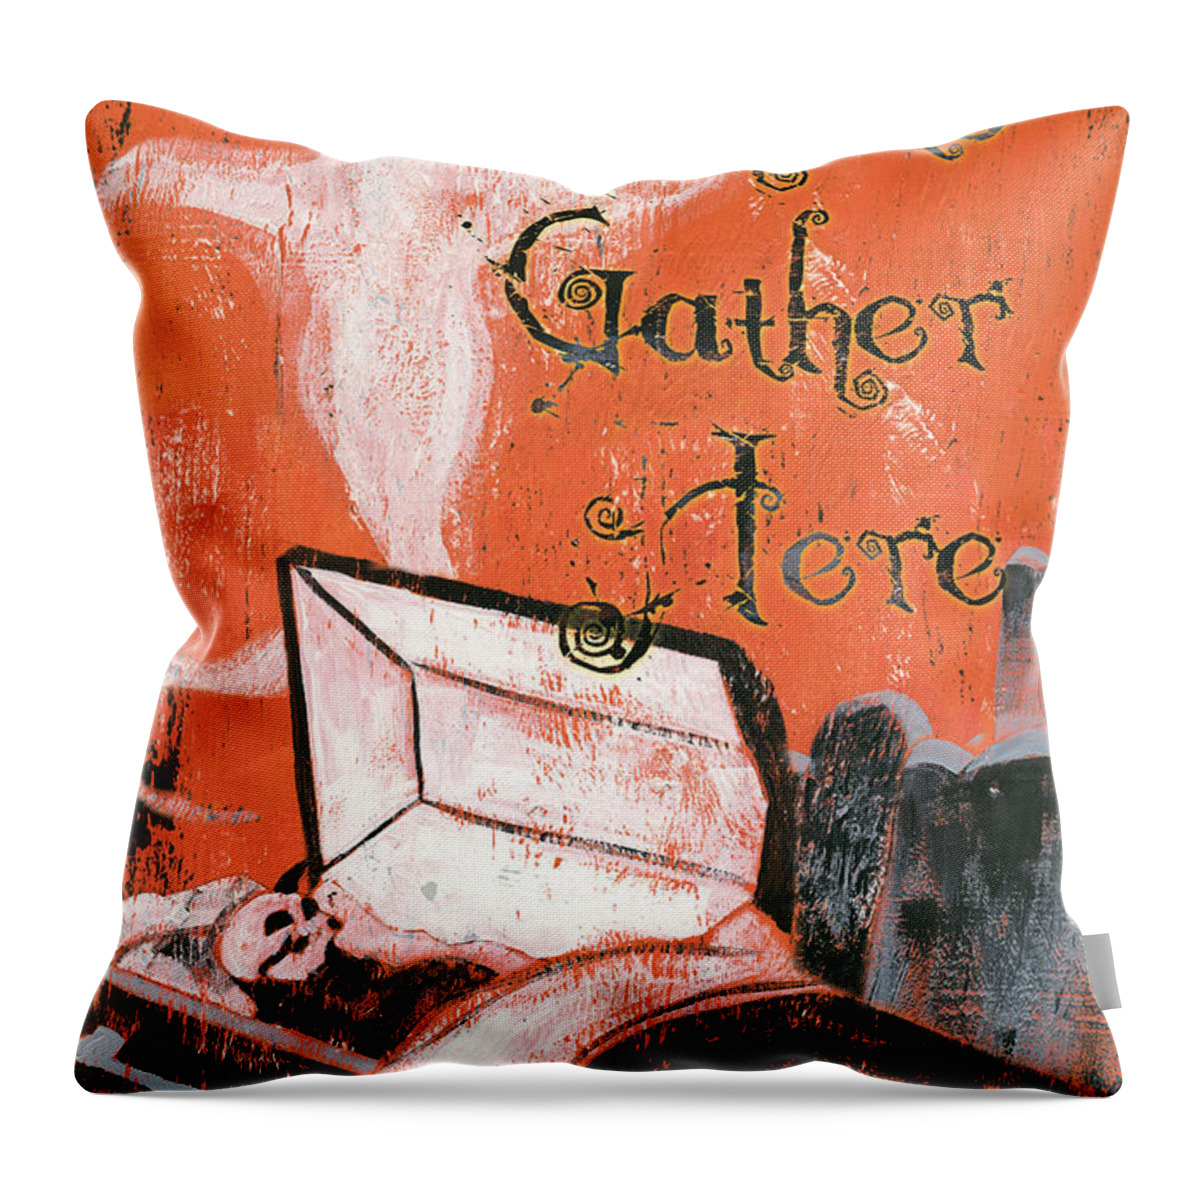 Ghosts Throw Pillow featuring the painting Ghosts Gather Here by Debbie DeWitt